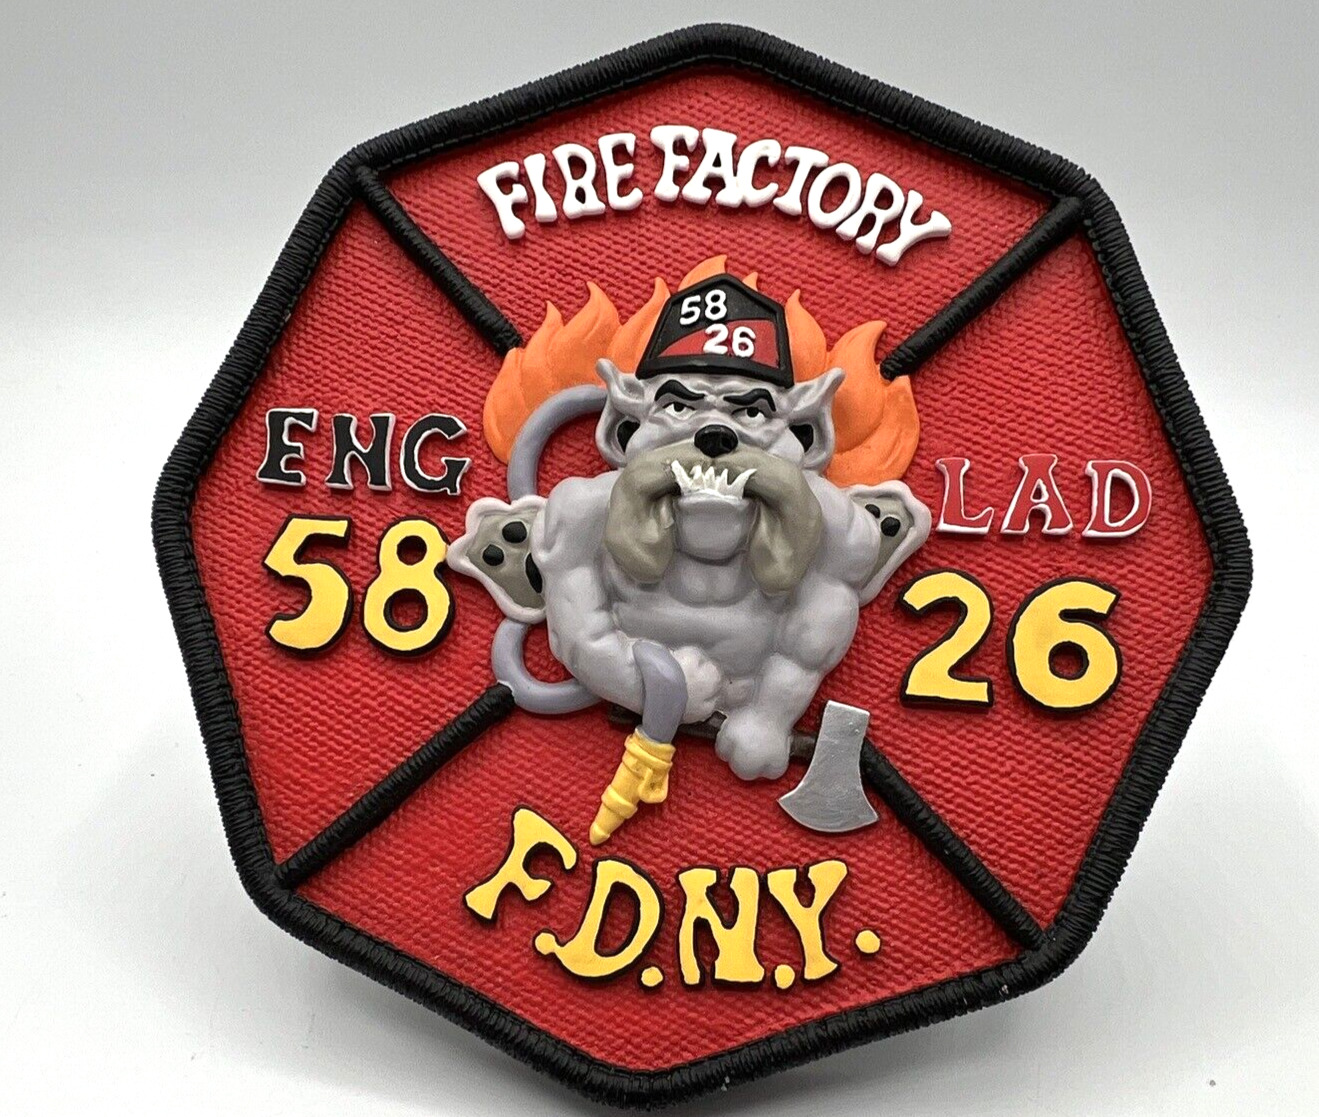 Code 3 Collectibles FDNY Fire Factory Lad 26 Plaque